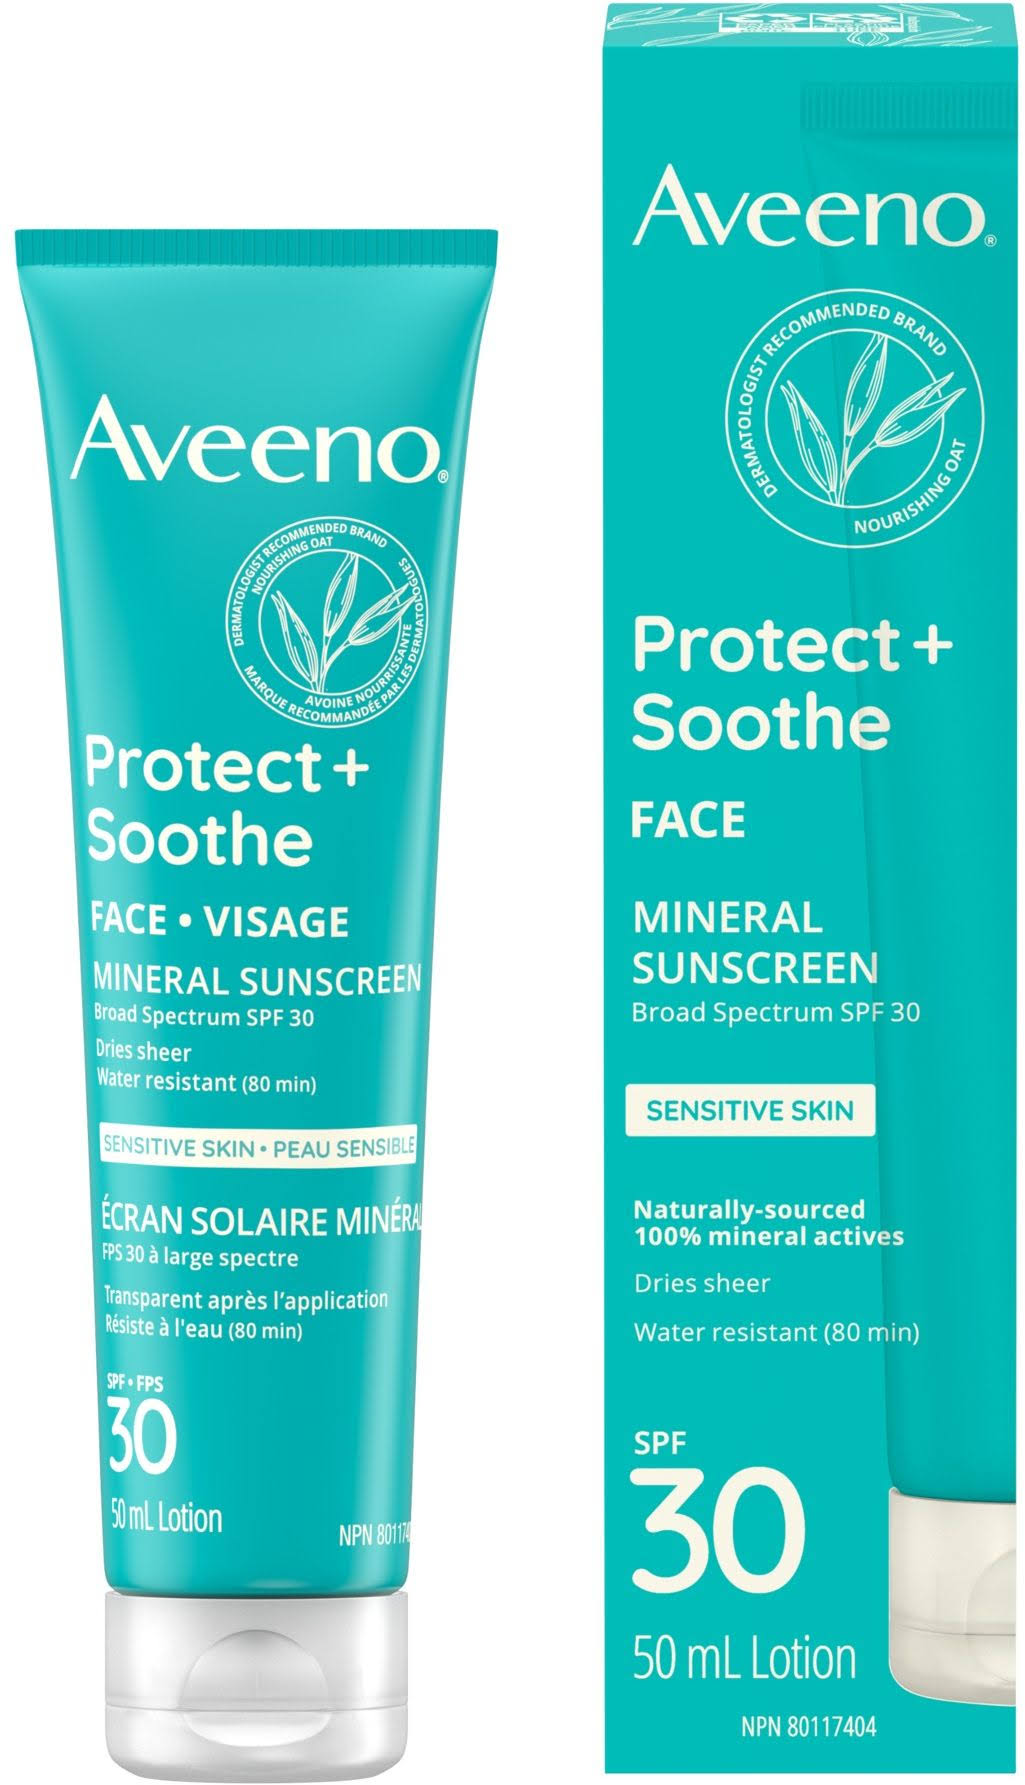 Aveeno Protect + Soothe Face Mineral Sunscreen SPF 30, 50 mL